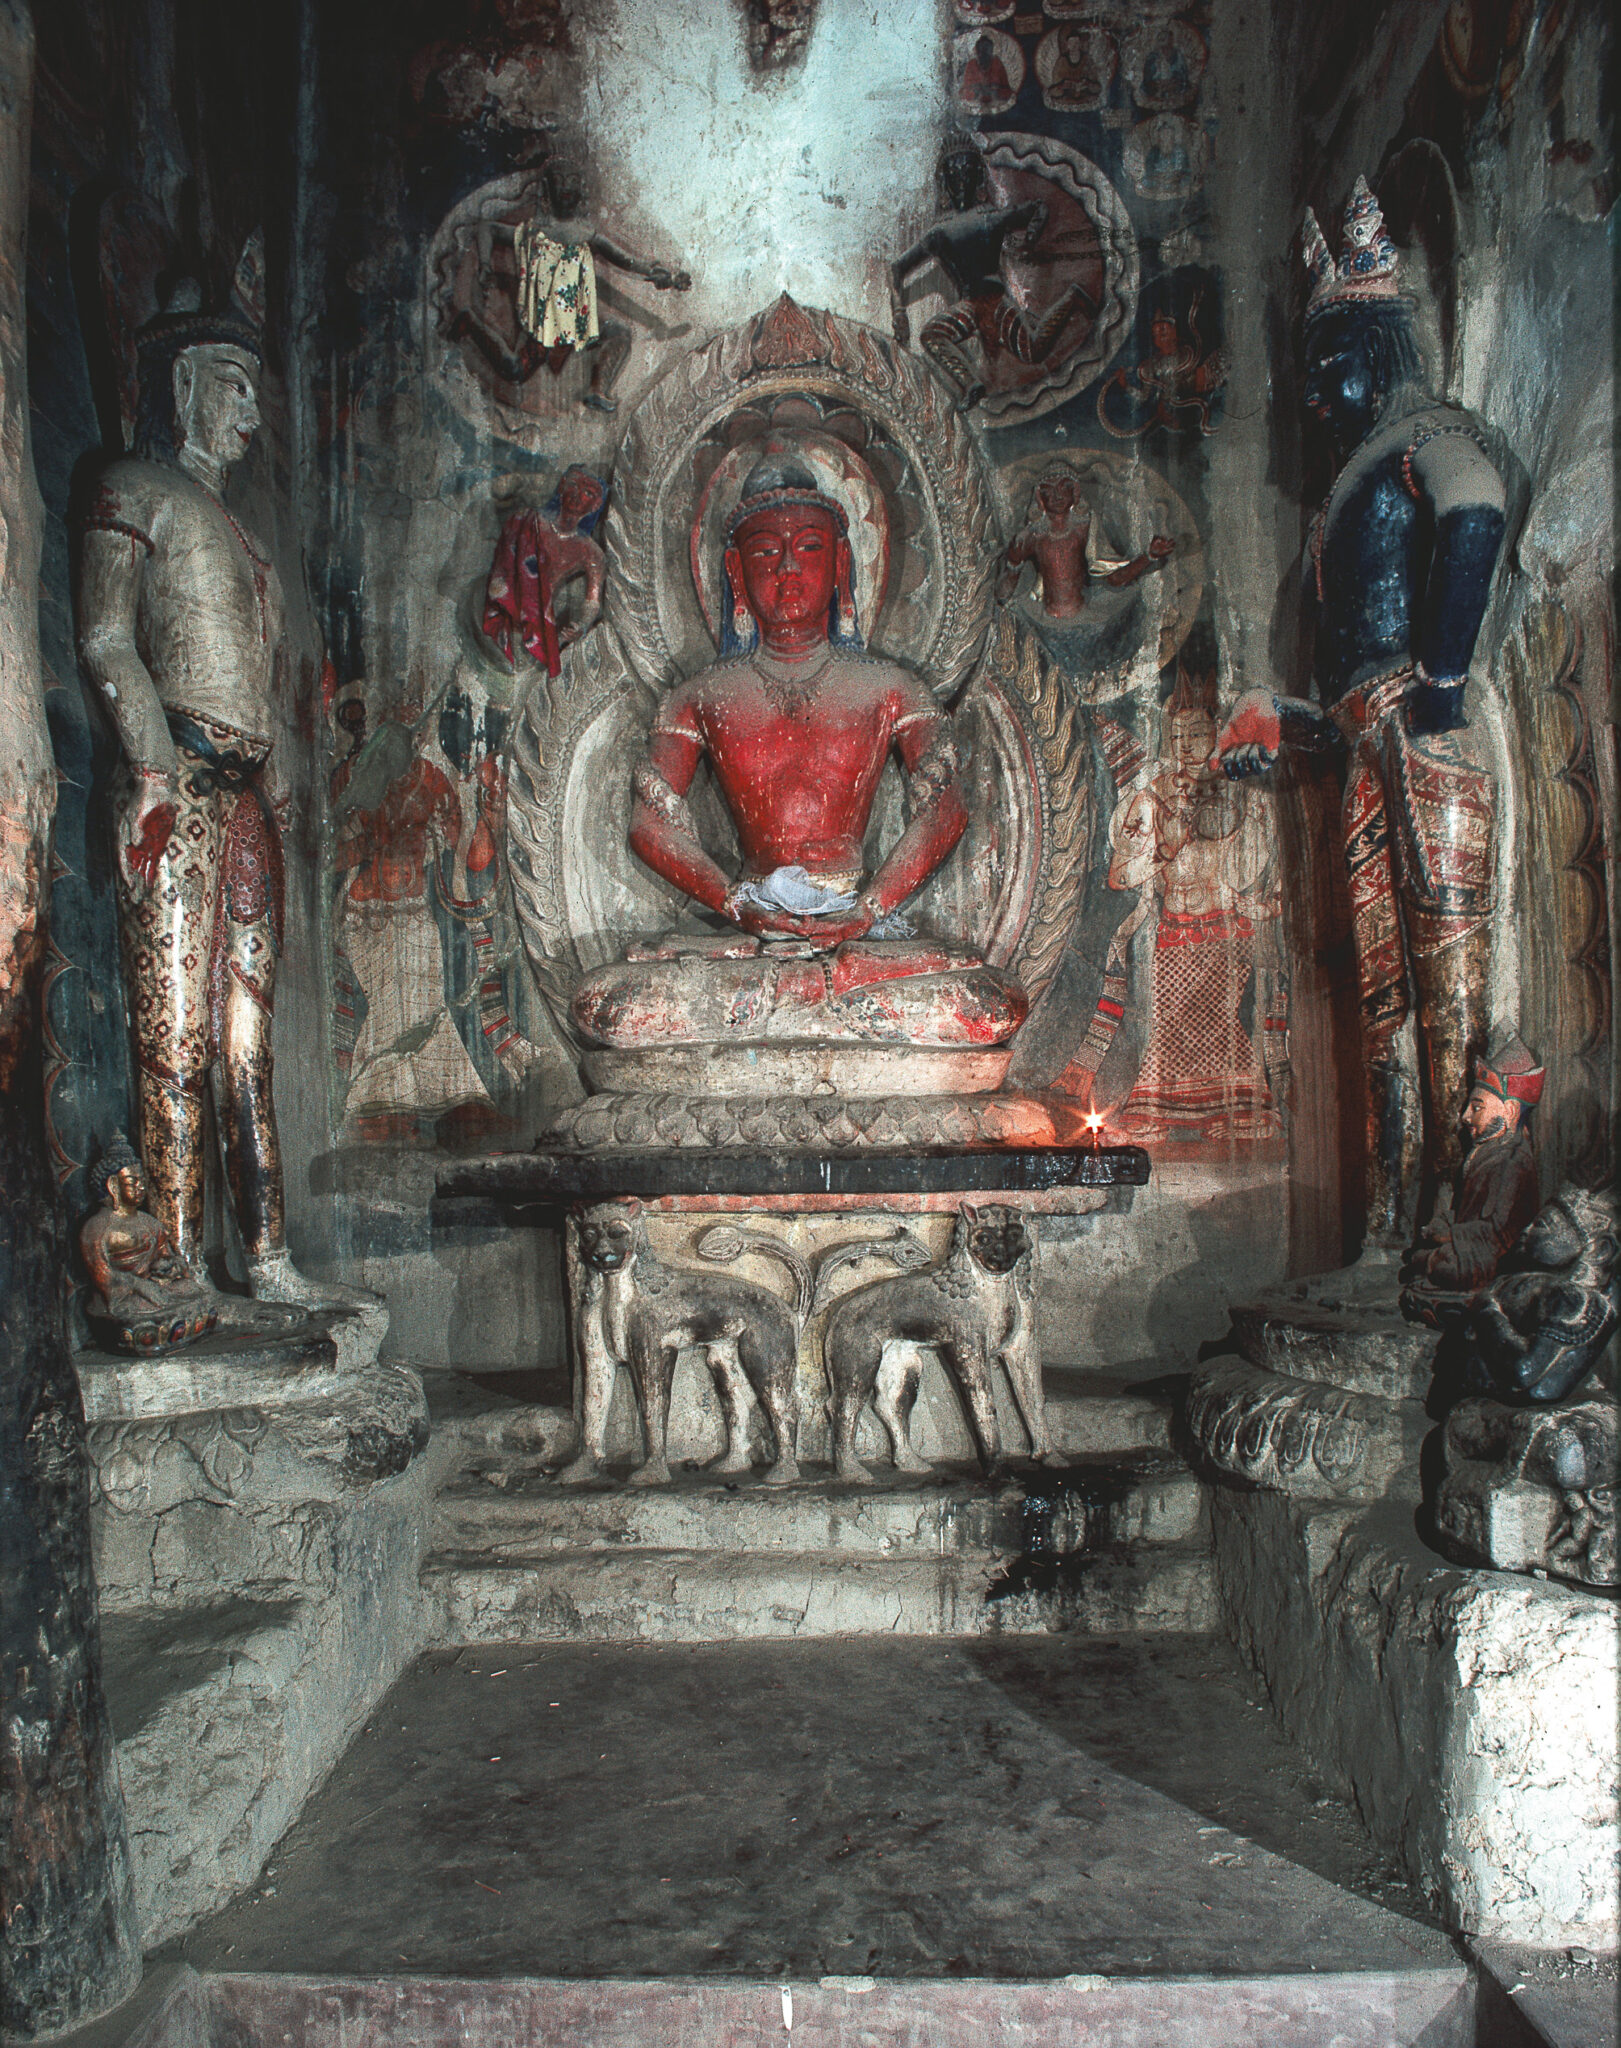 Seated Buddha statue with red skin; situated in alcove decorated with statues, reliefs, and murals depicting deities